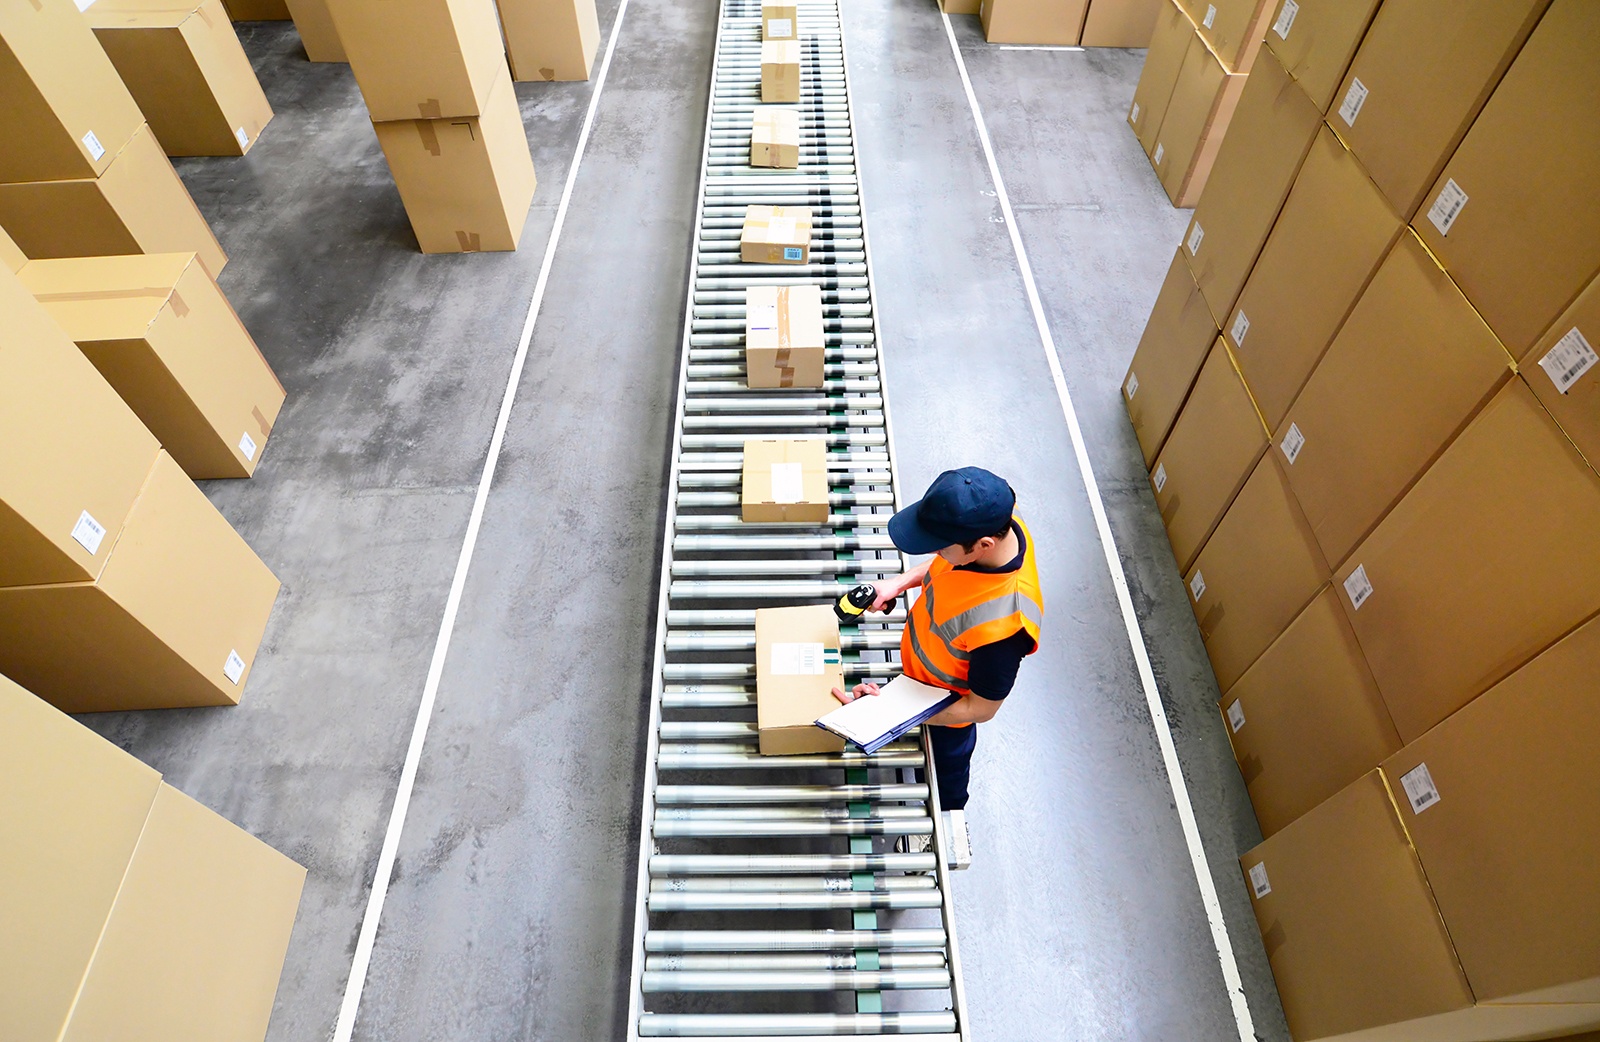 Measuring warehouse performance: What does good look like?